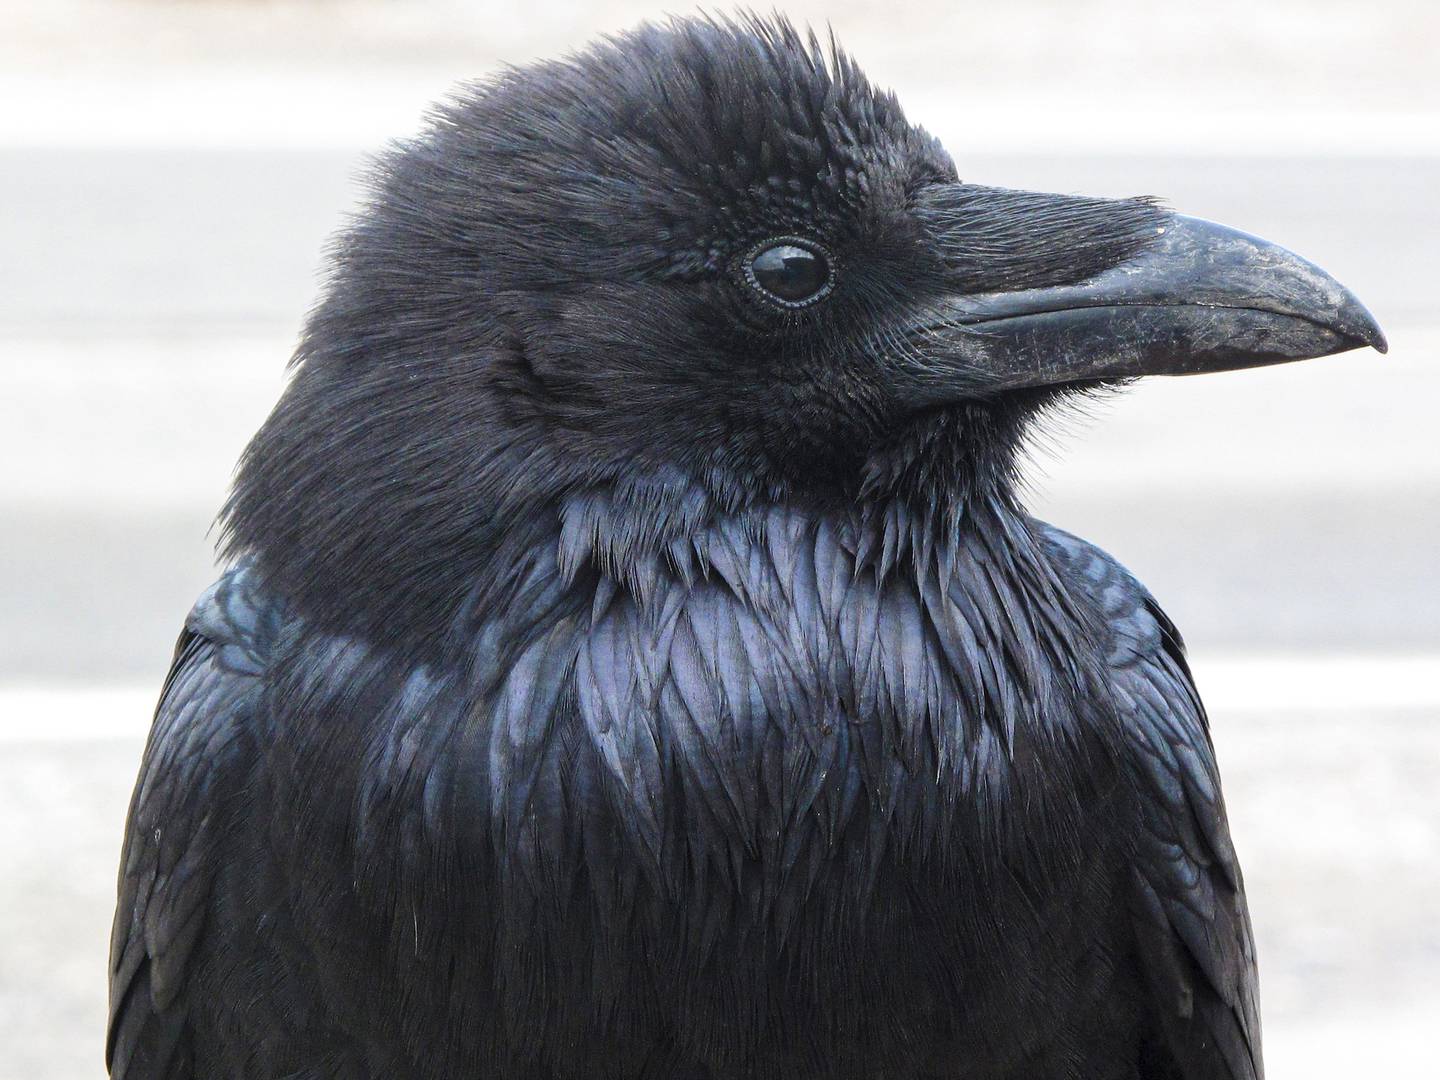 Ravens like this one inspire people to respond to their calls, and sometimes to pick up a pencil